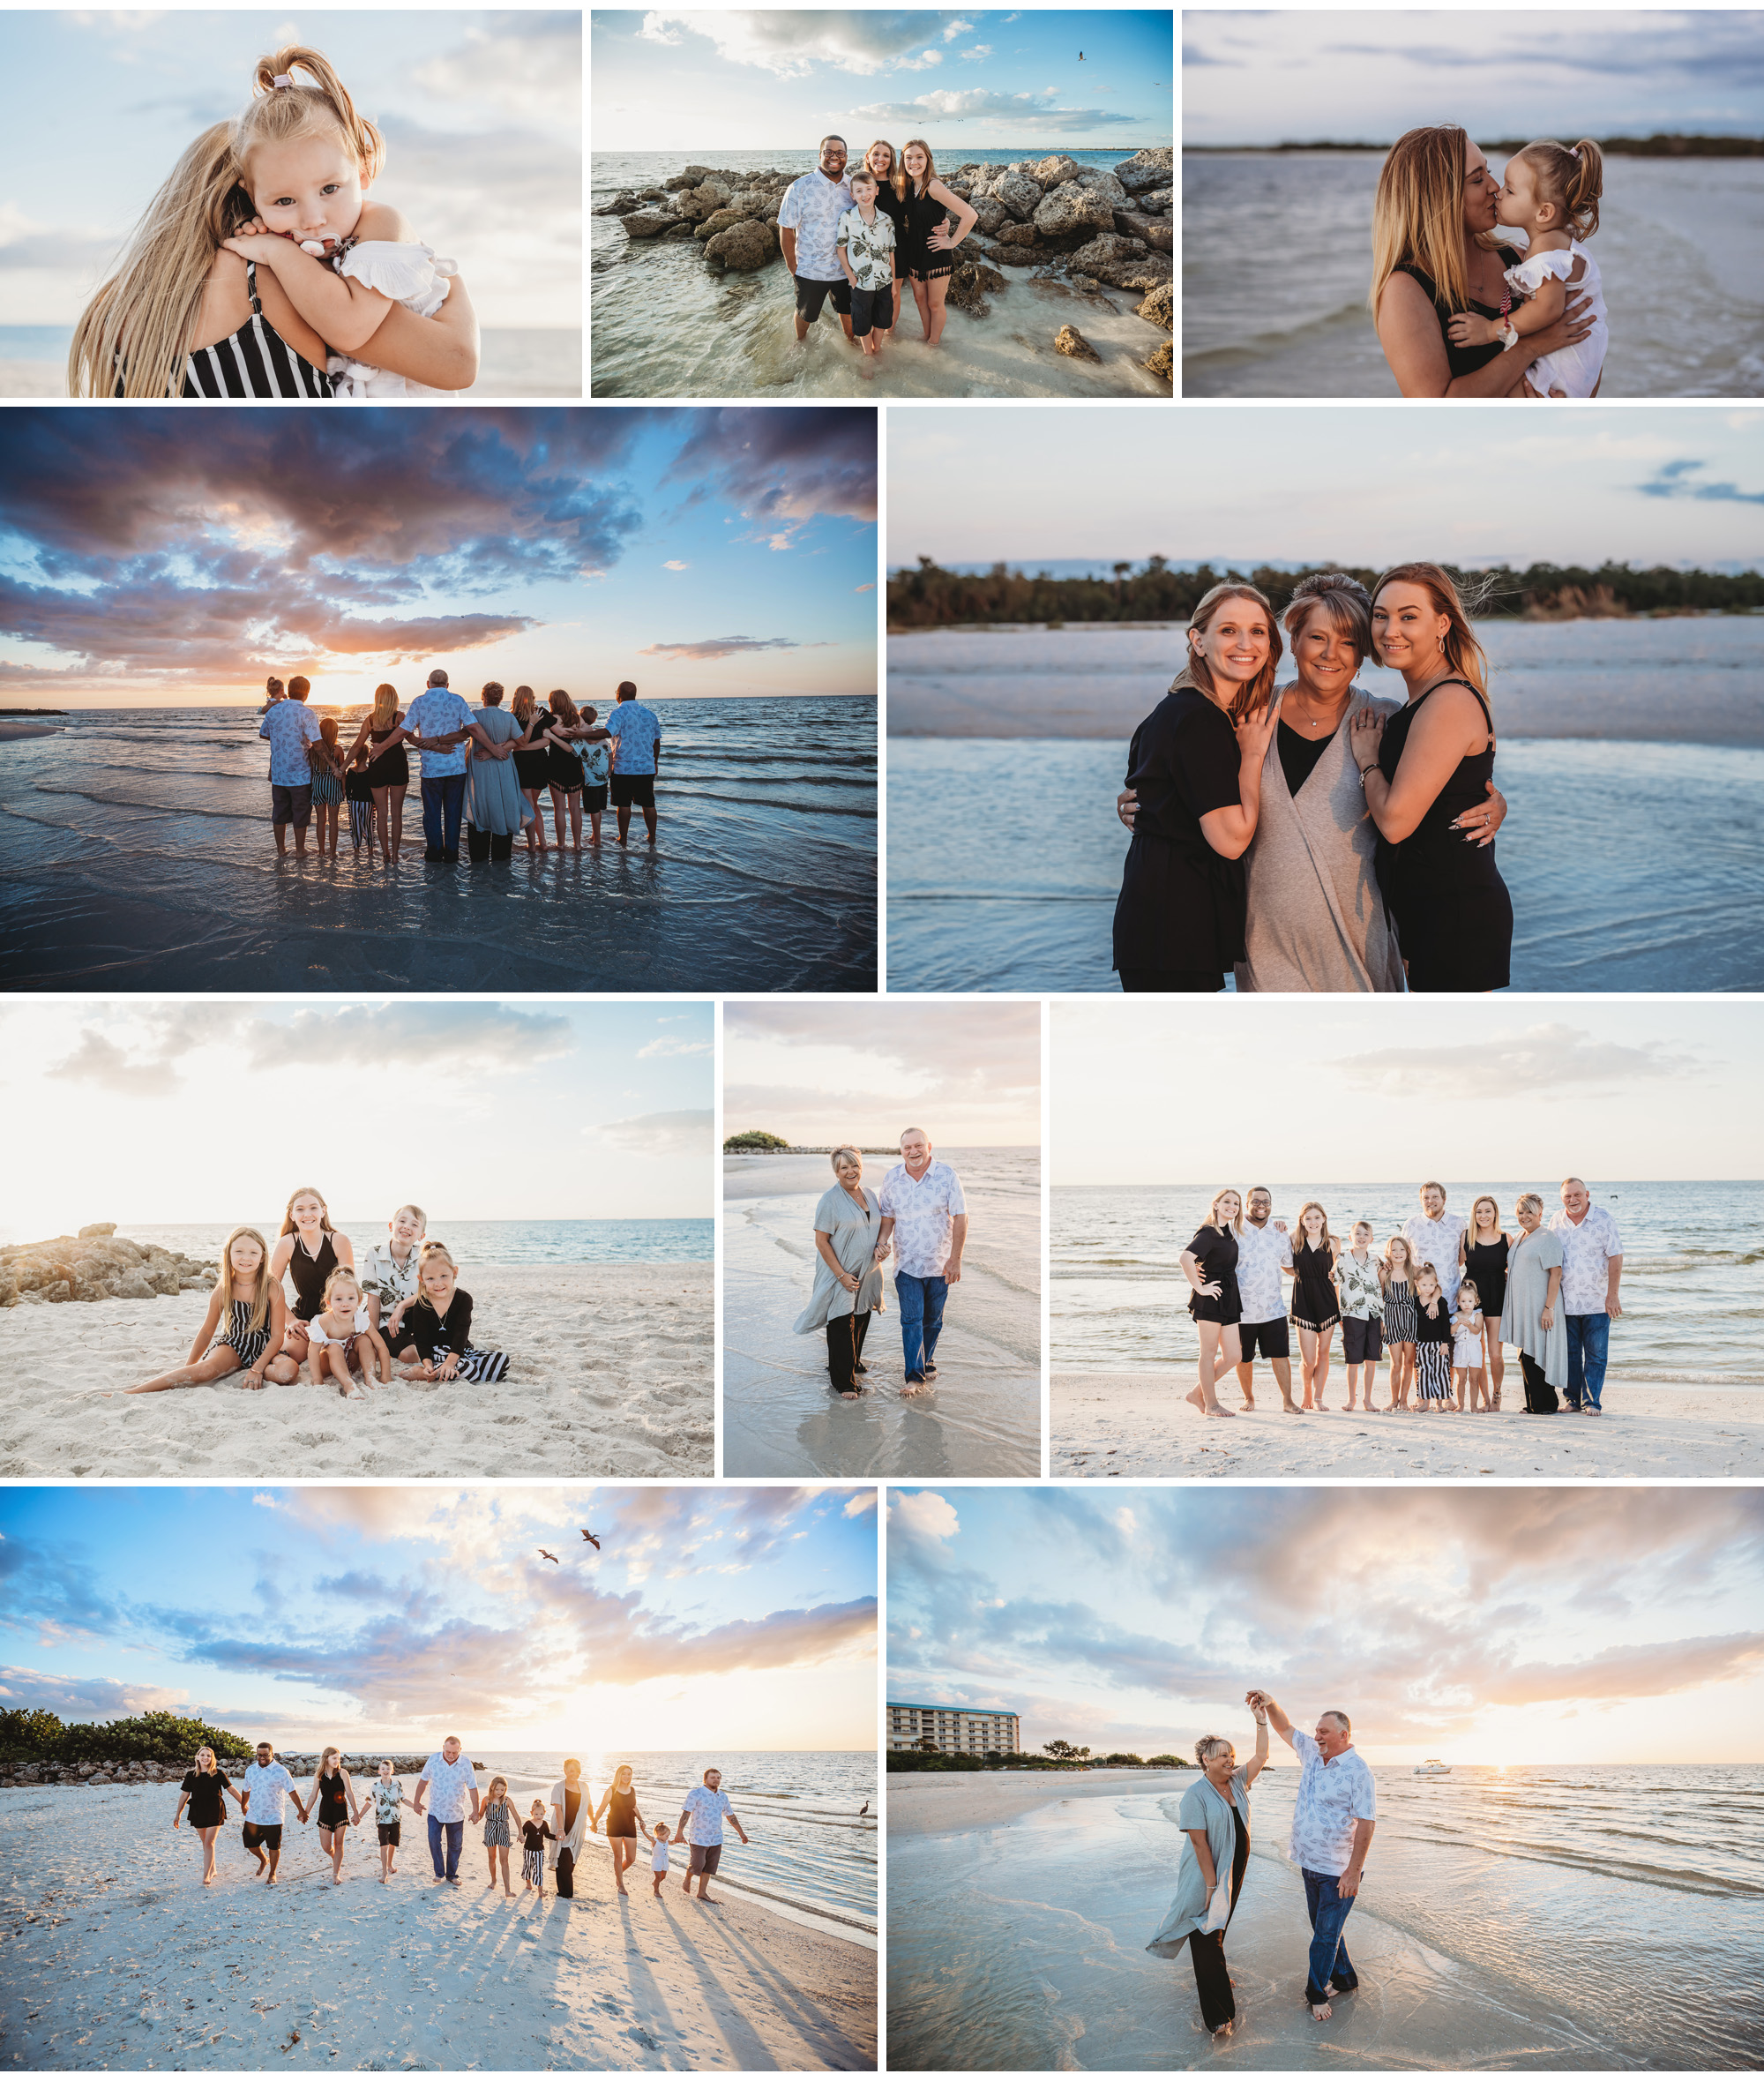 An extended family takes sunset beach portraits in Bonita Springs. Grandkids and grandparents join the family for a beautiful beach session.